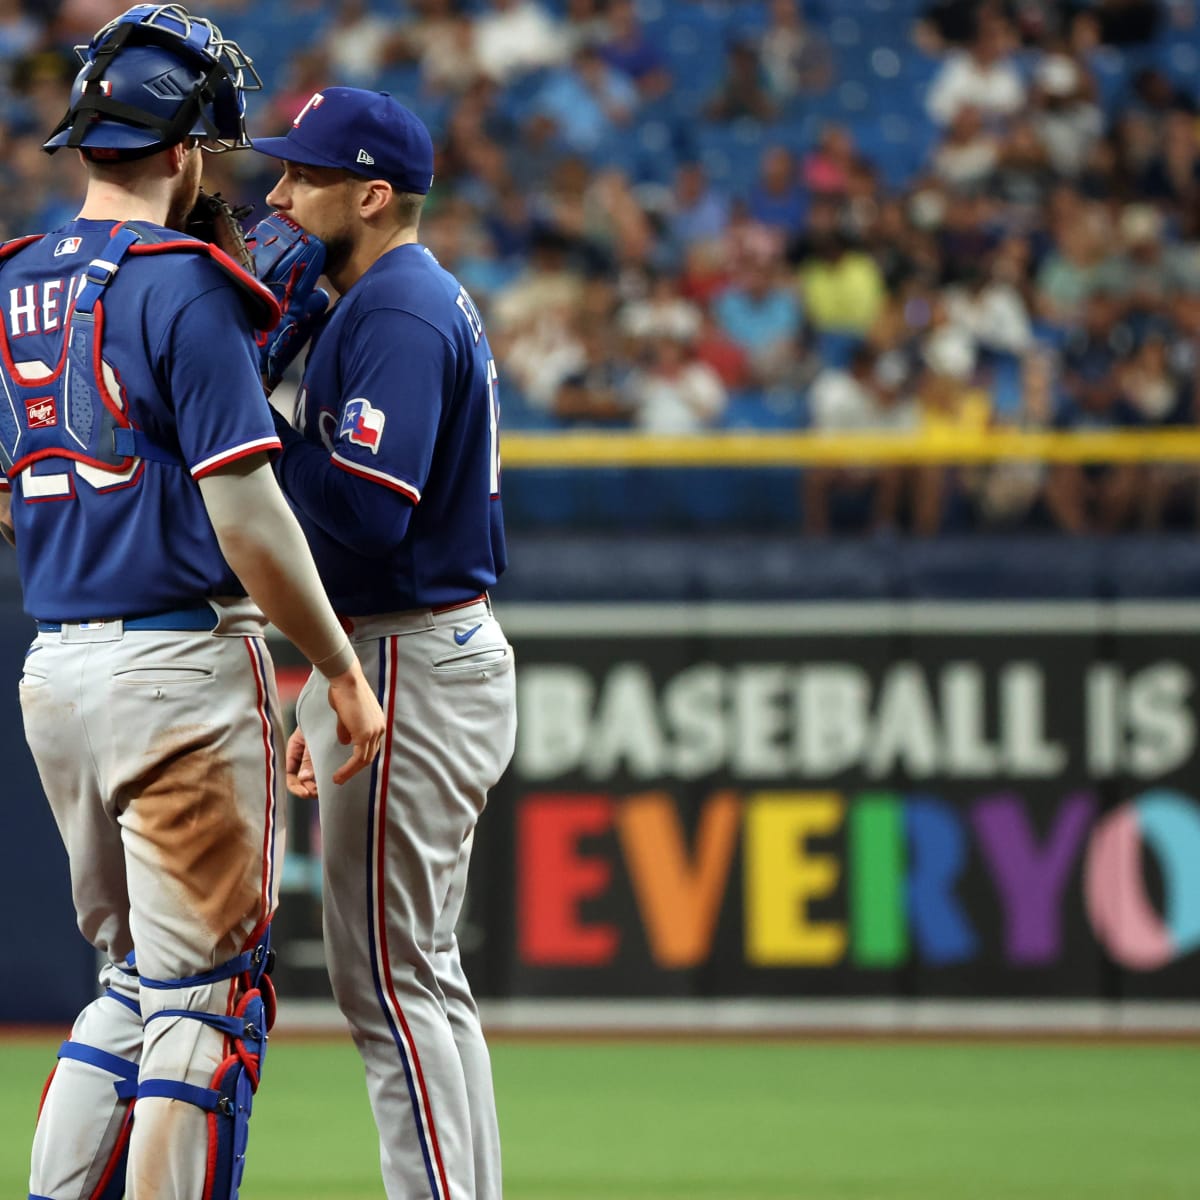 Texas Rangers Criticized For Not Hosting Pride Night - Sports Illustrated  Texas Rangers News, Analysis and More